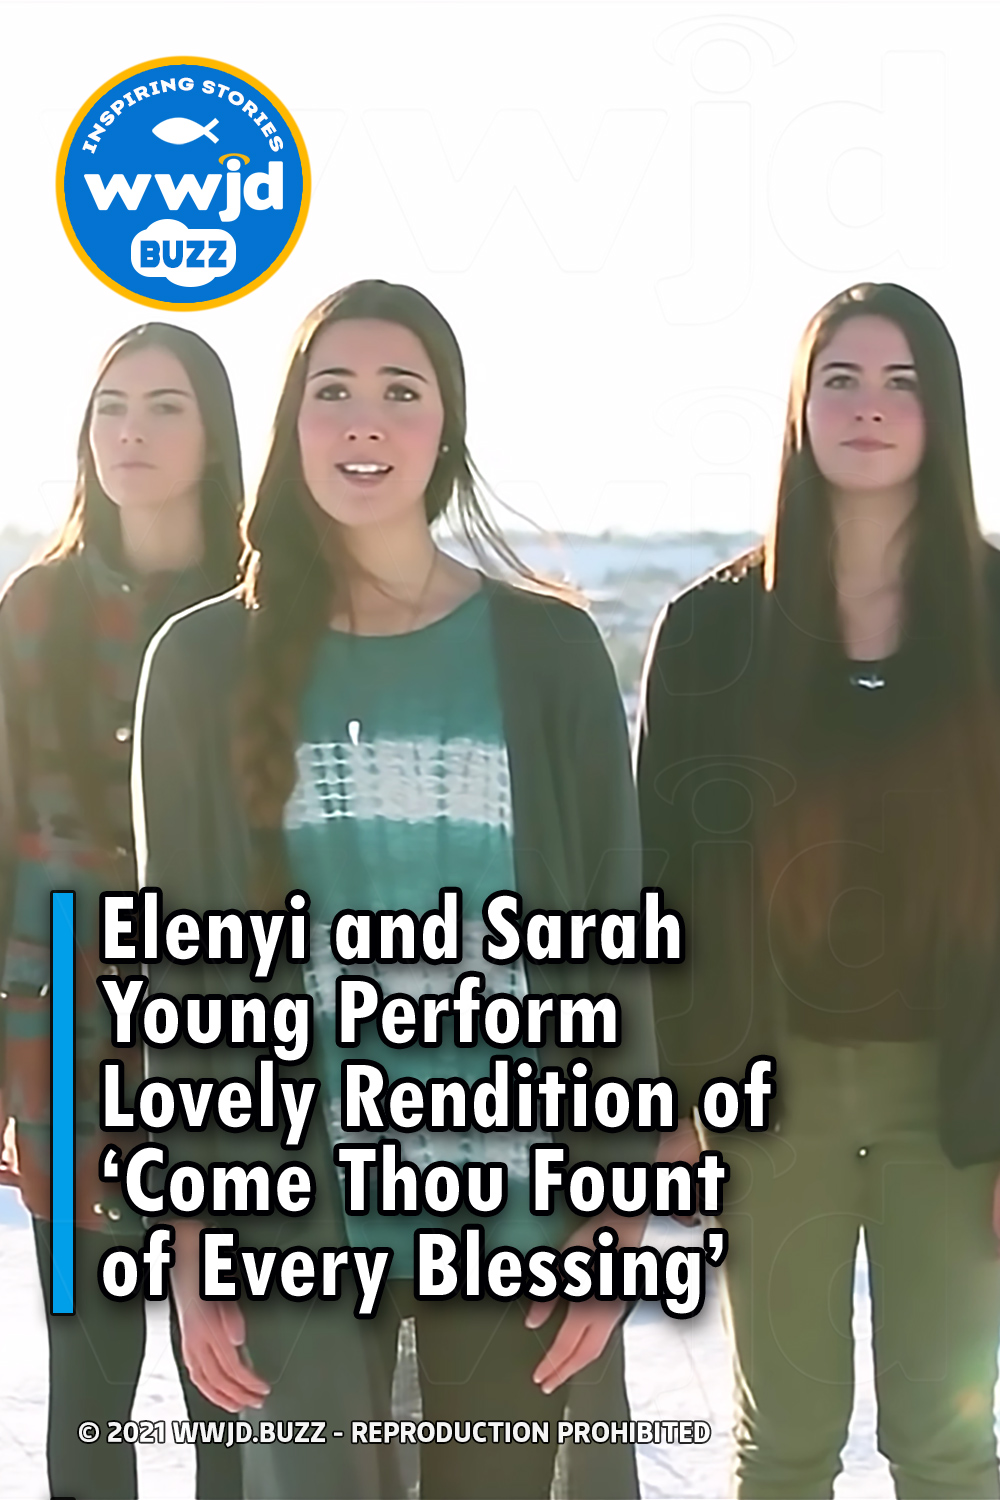 Elenyi and Sarah Young Perform Lovely Rendition of ‘Come Thou Fount of Every Blessing’